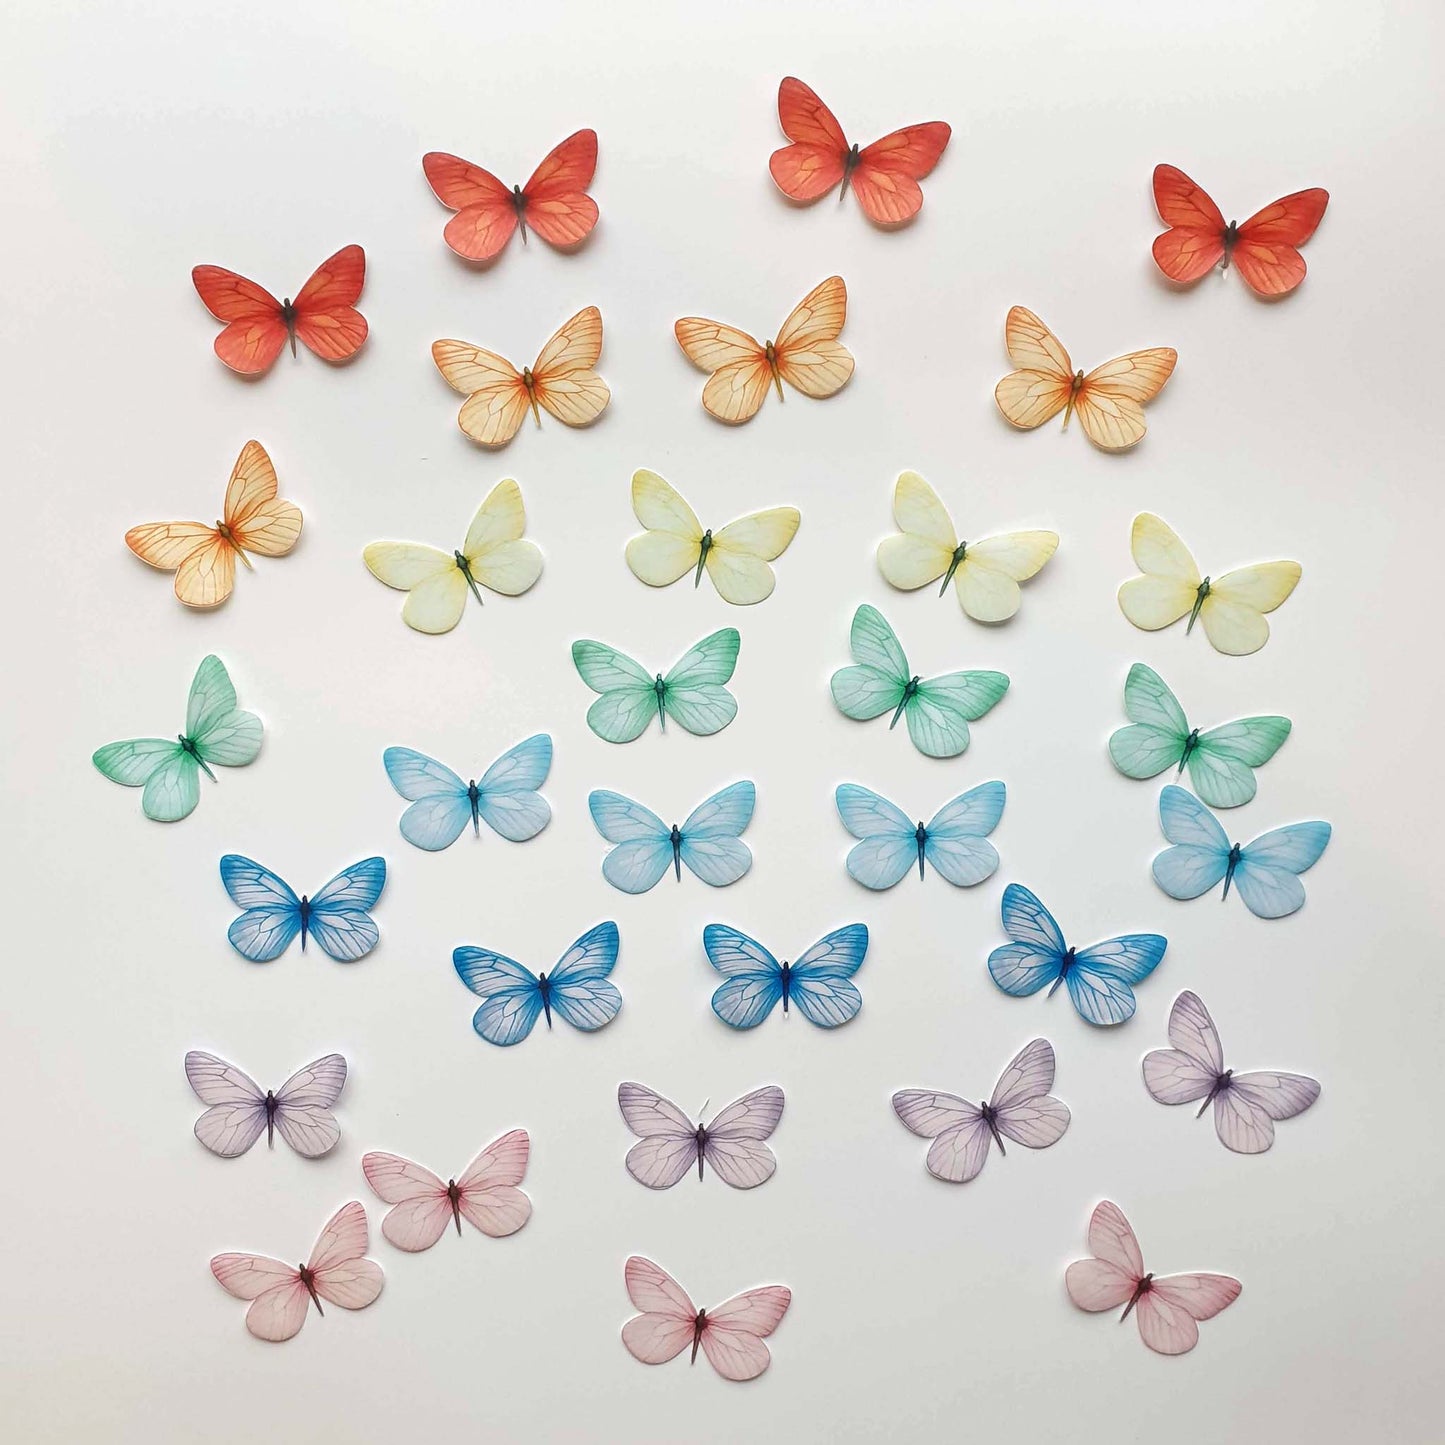 These wafer butterflies are simply magnificent and will make ordinary desserts extraordinary.  The pack contains 32 wafer butterflies in mixed colours, as shown in the photos.  These butterflies are precut and ready to use. Each butterfly has a wingspan of approximately 1.5 inches (4cm).